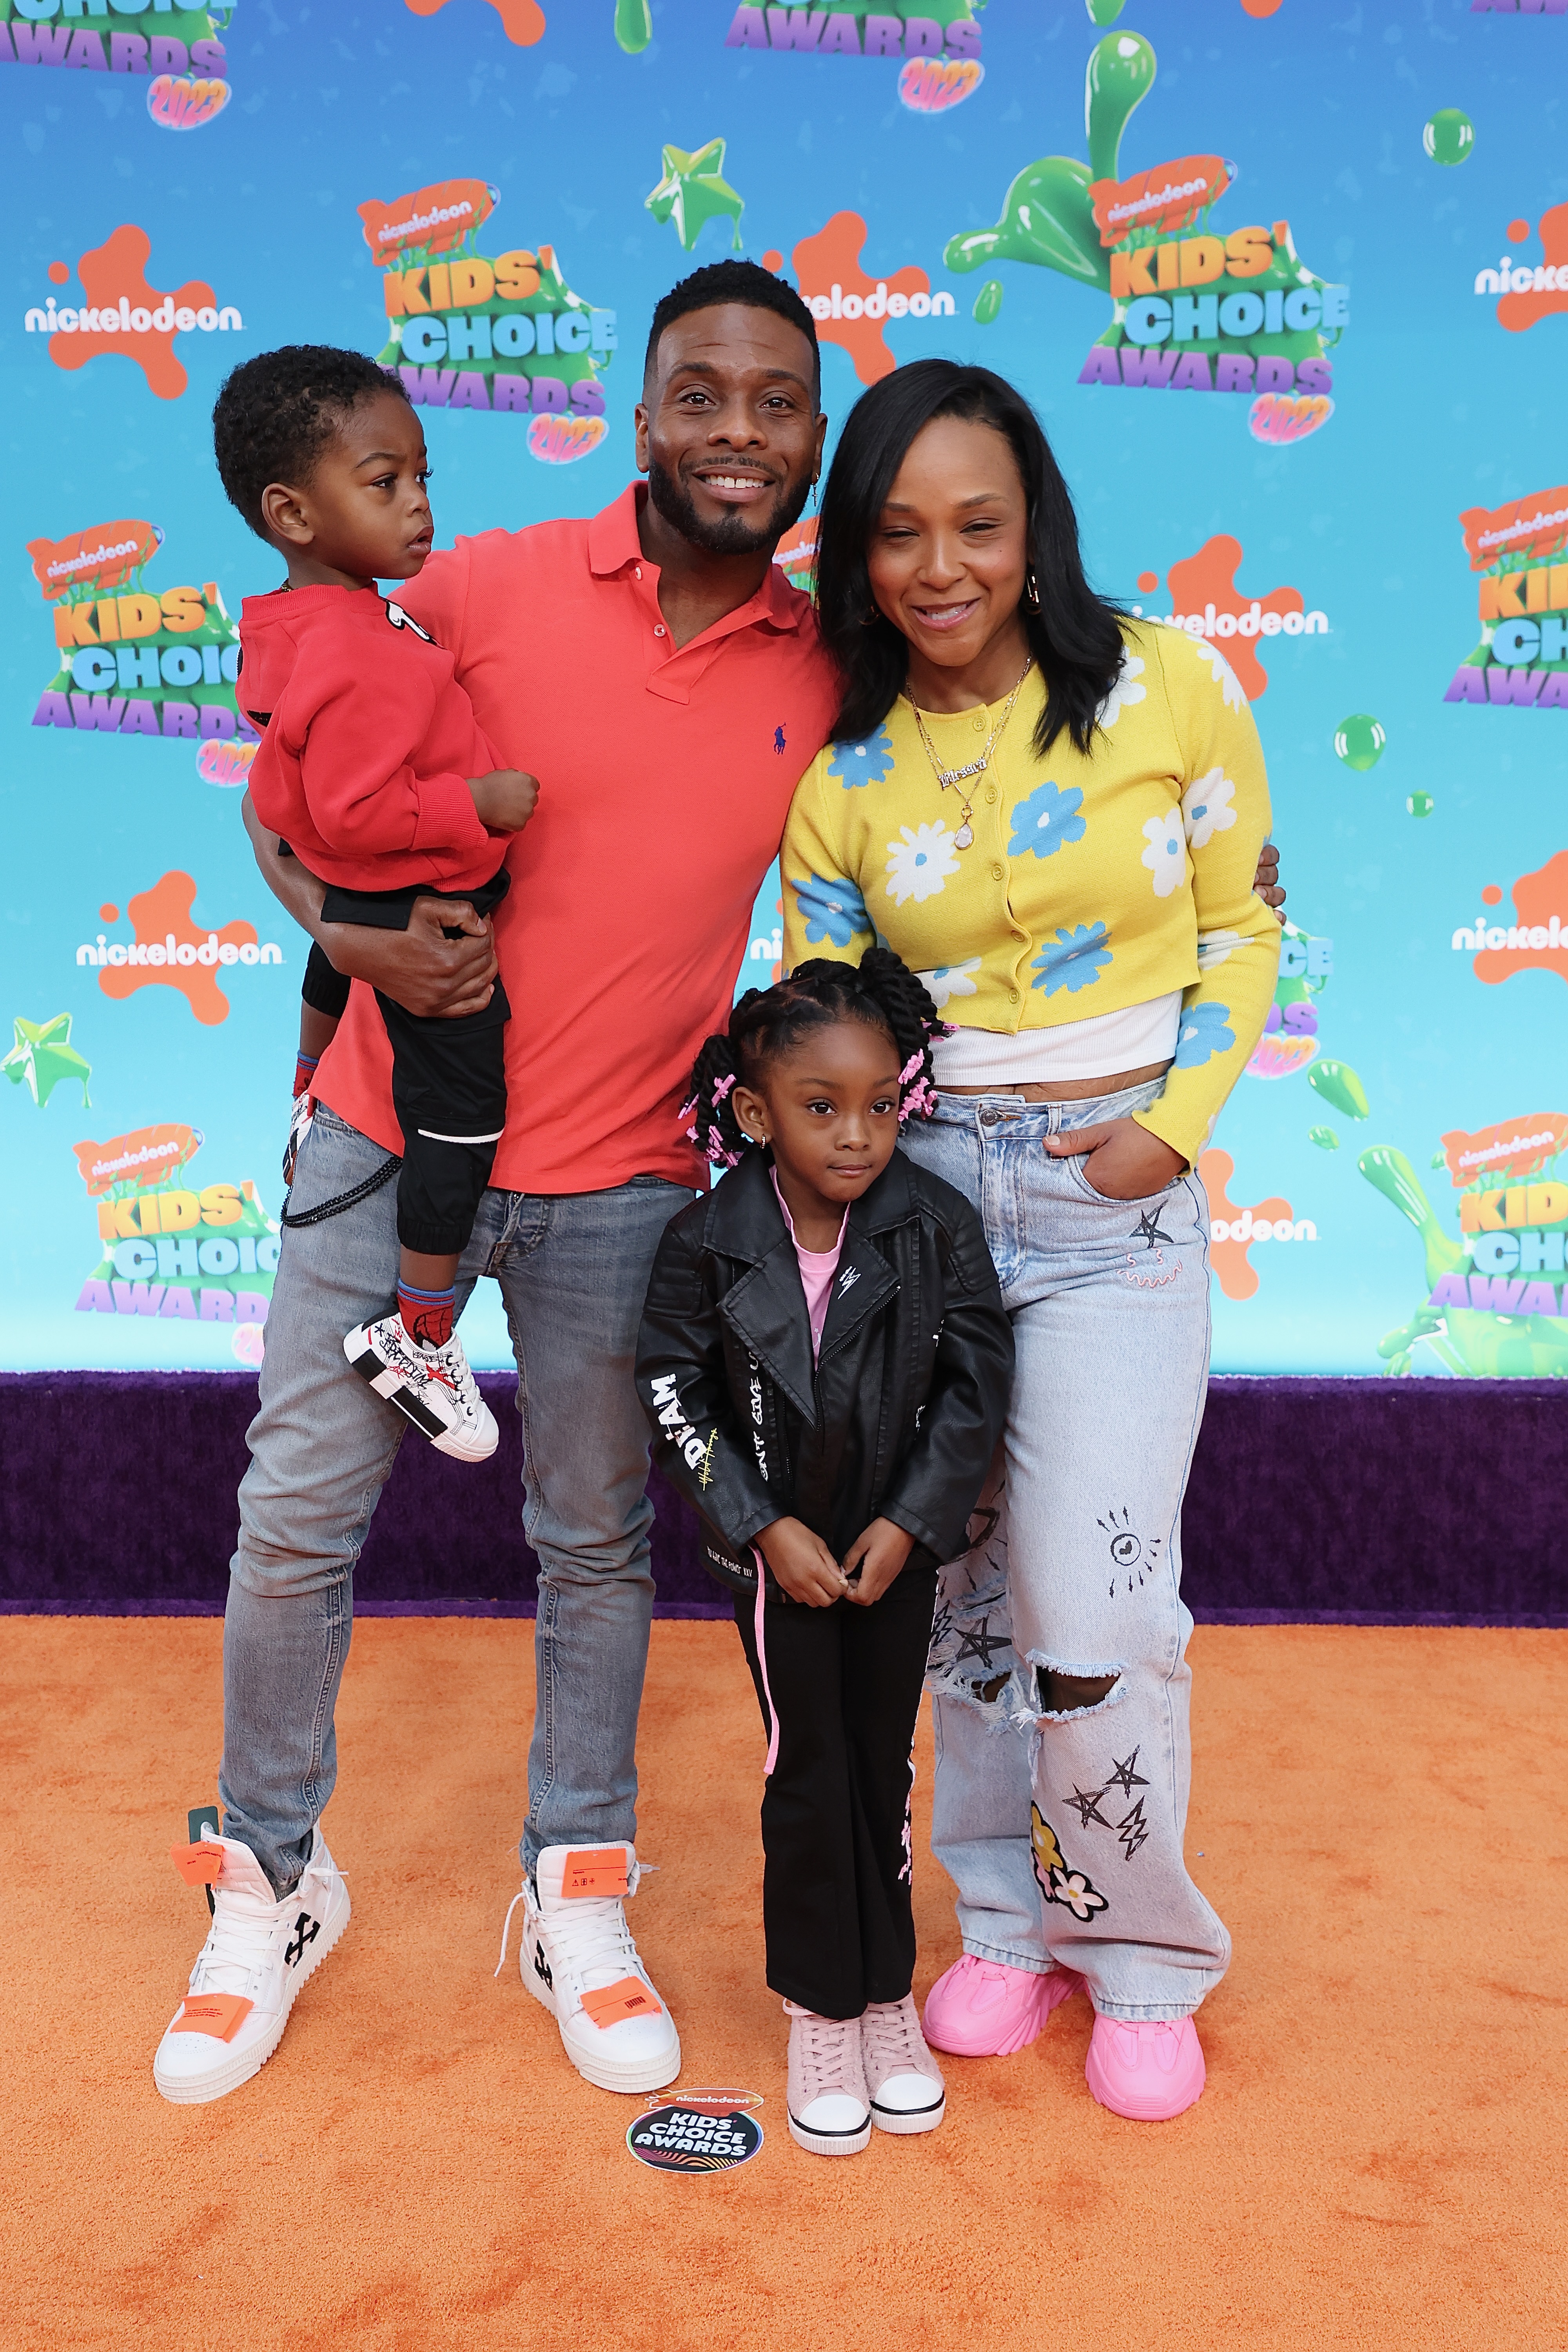 Kel posed with wife Asia Lee-Mitchell and their kids at an event in March 2023